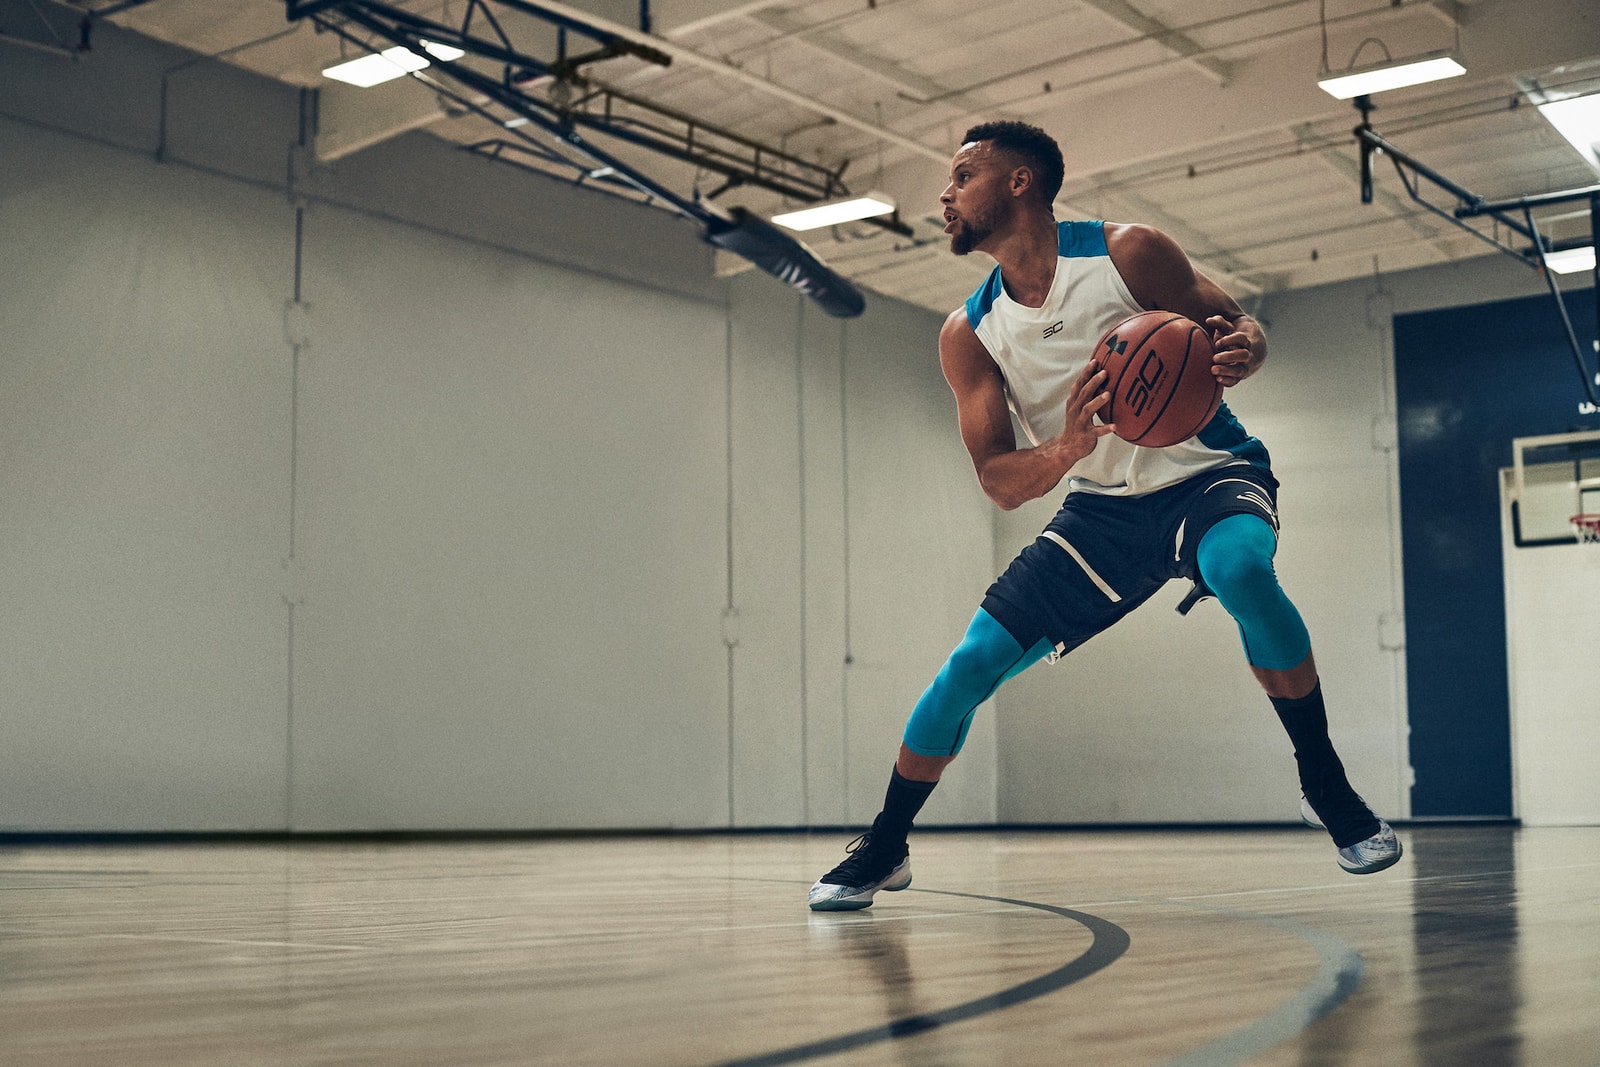 Under Armour 正式發佈 Stephen Curry 全新簽名球鞋 Curry 4 